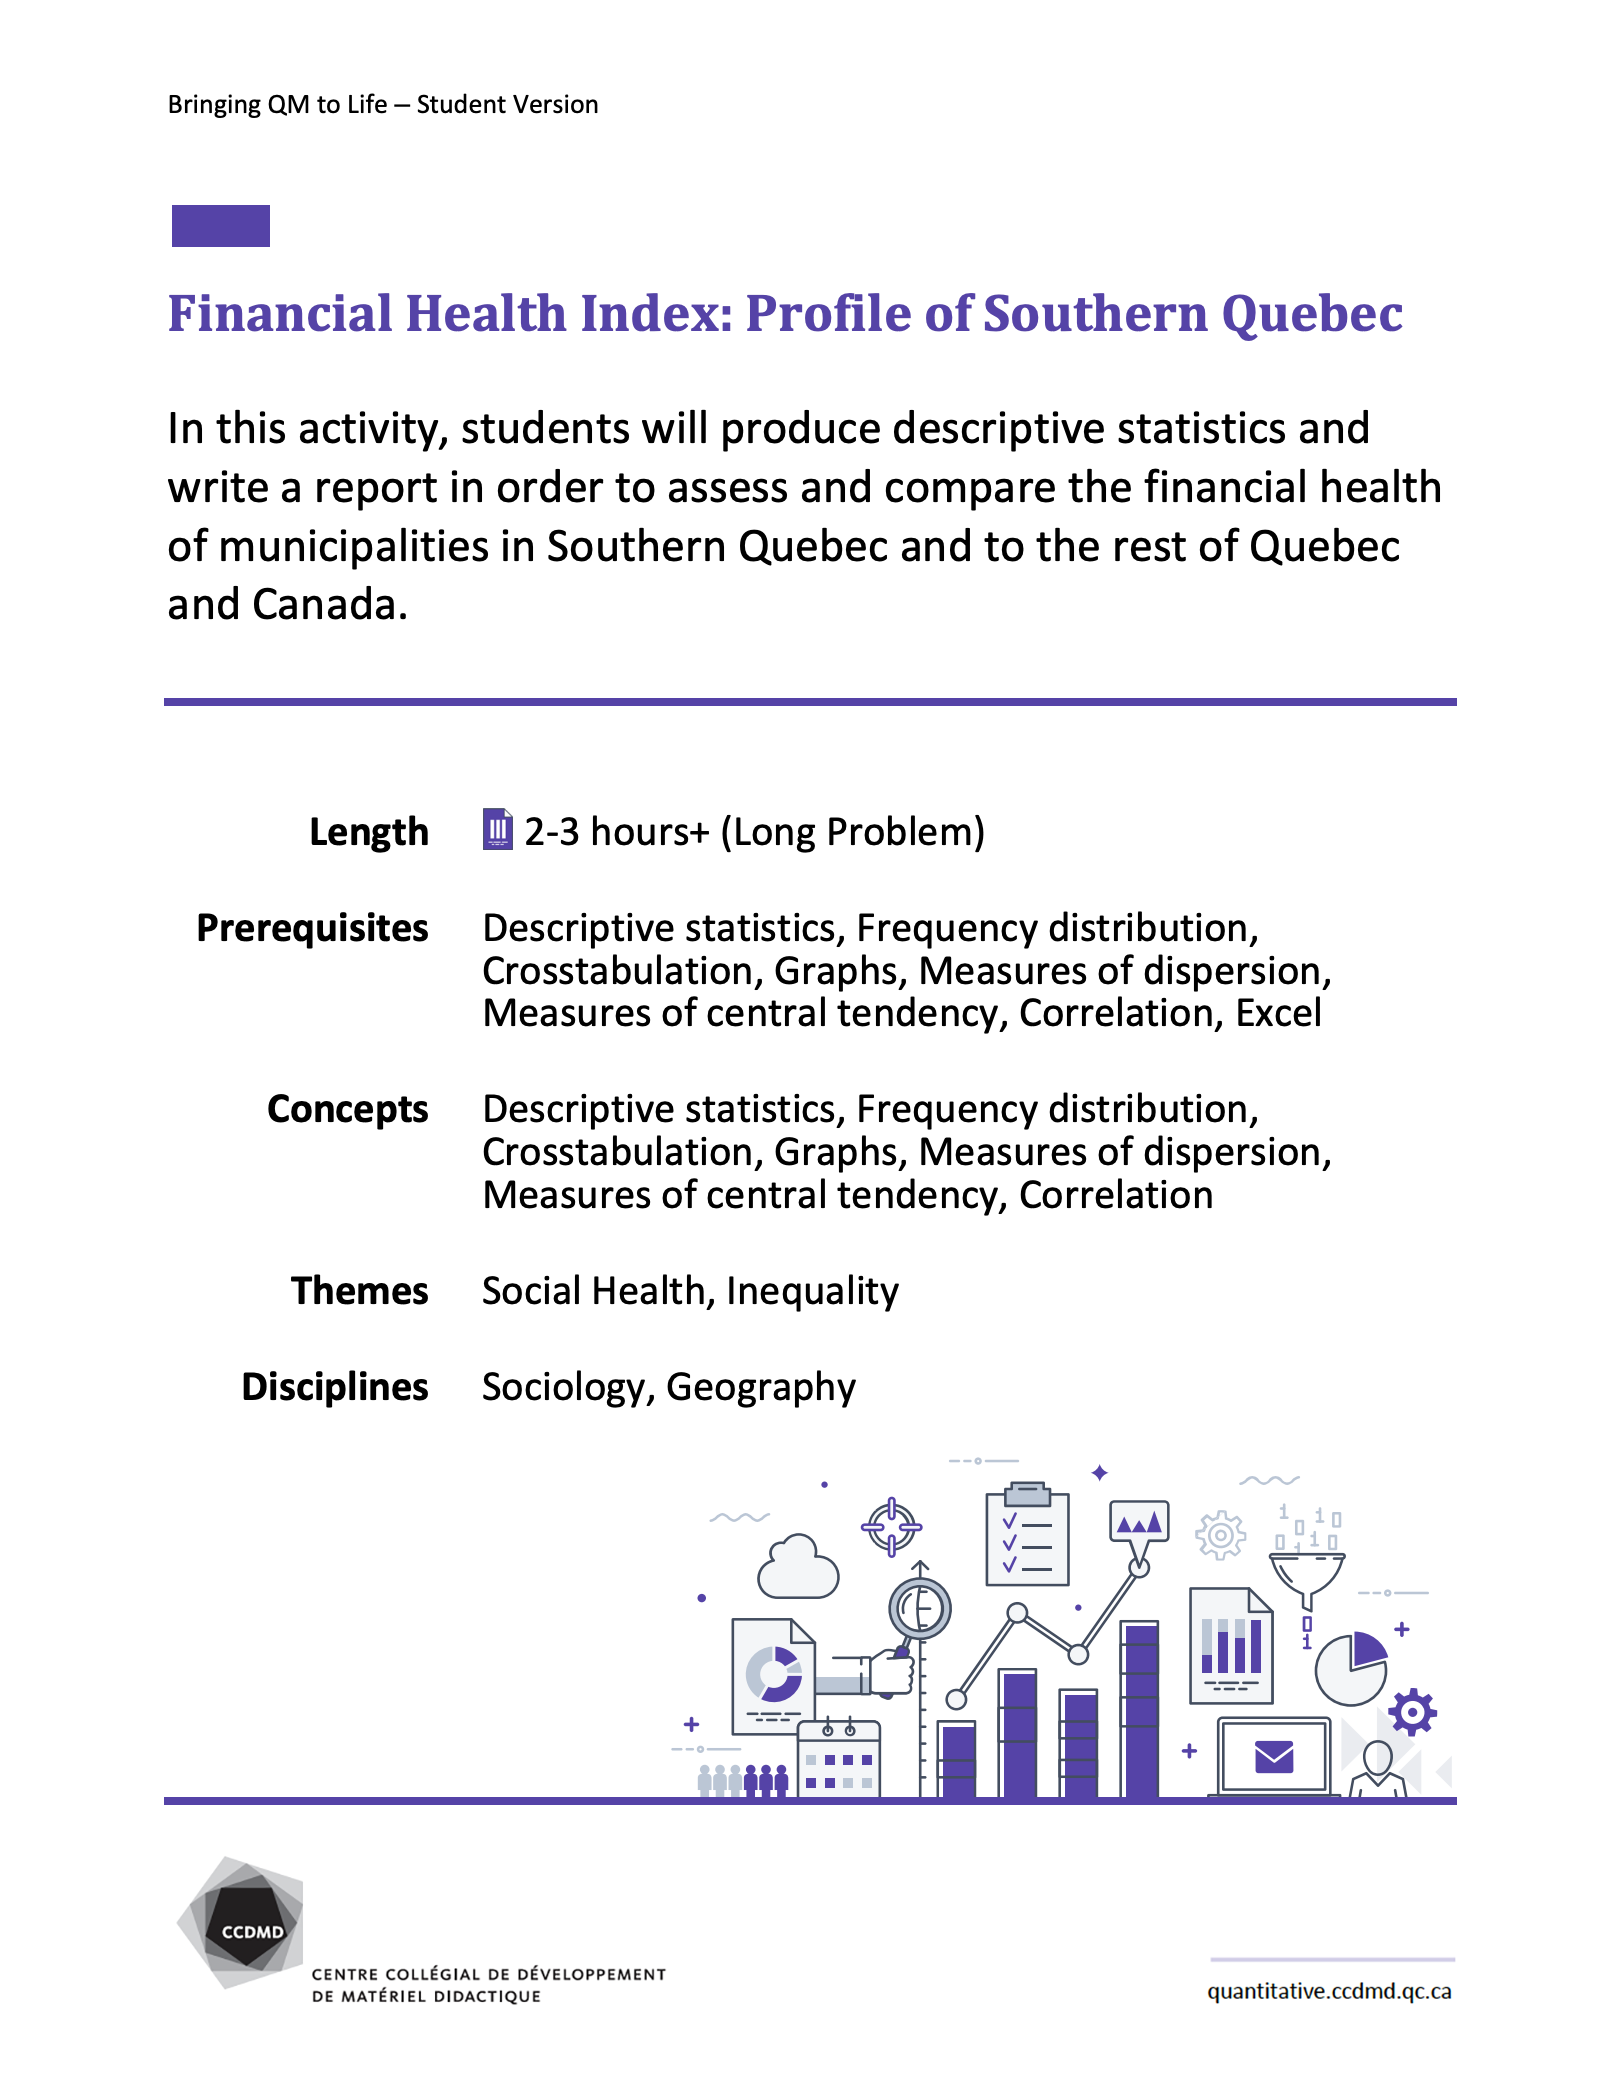 Financial Health Index: Profile of Southern Quebec